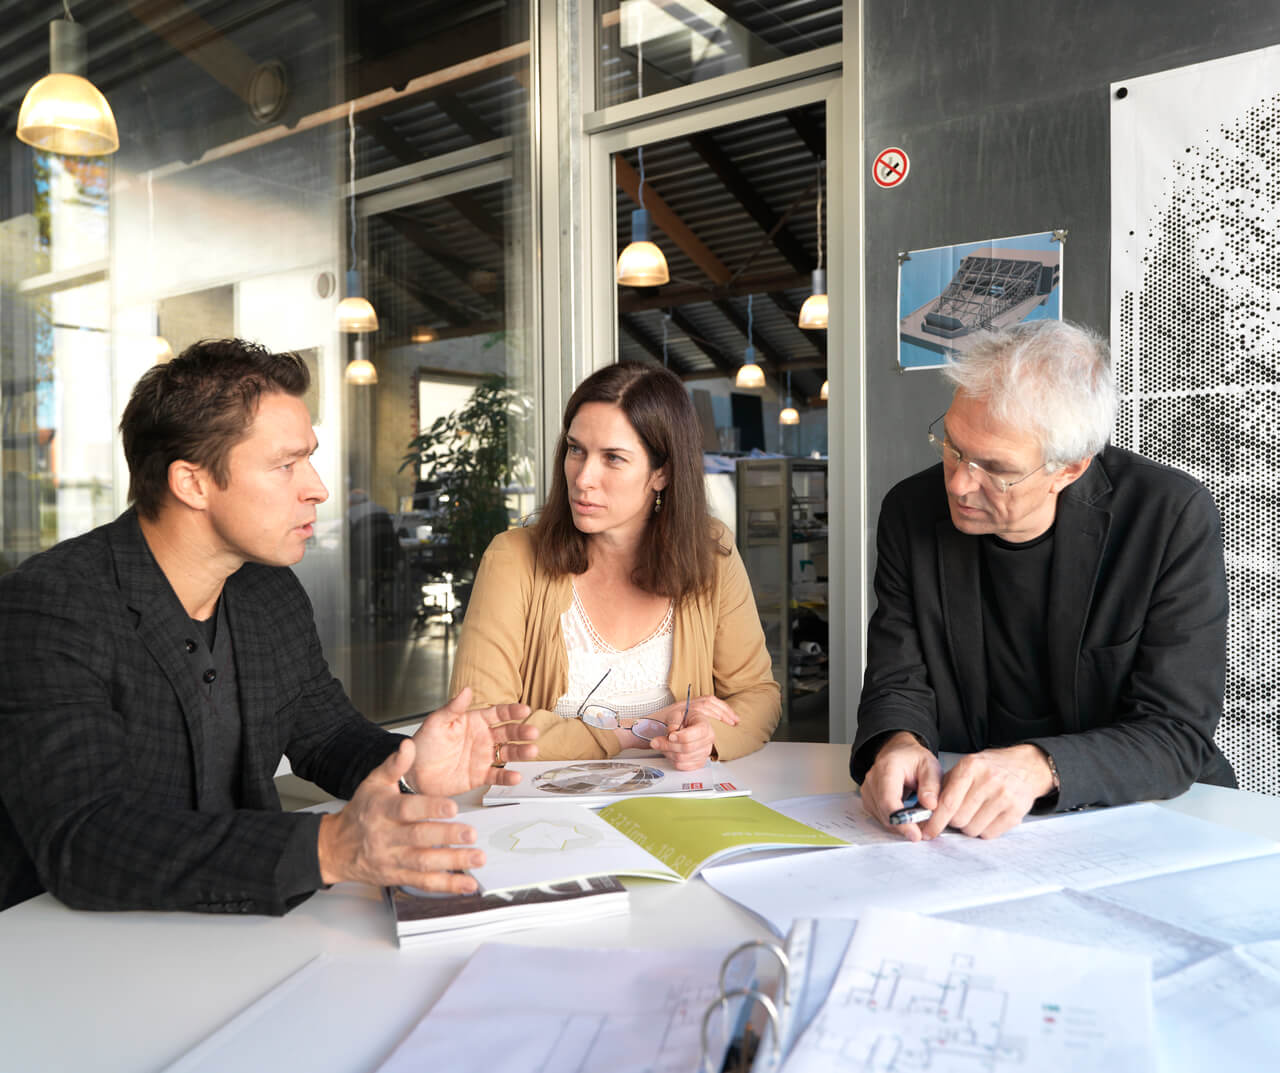 Professionals discussing plans in a contemporary office with documents on the table.